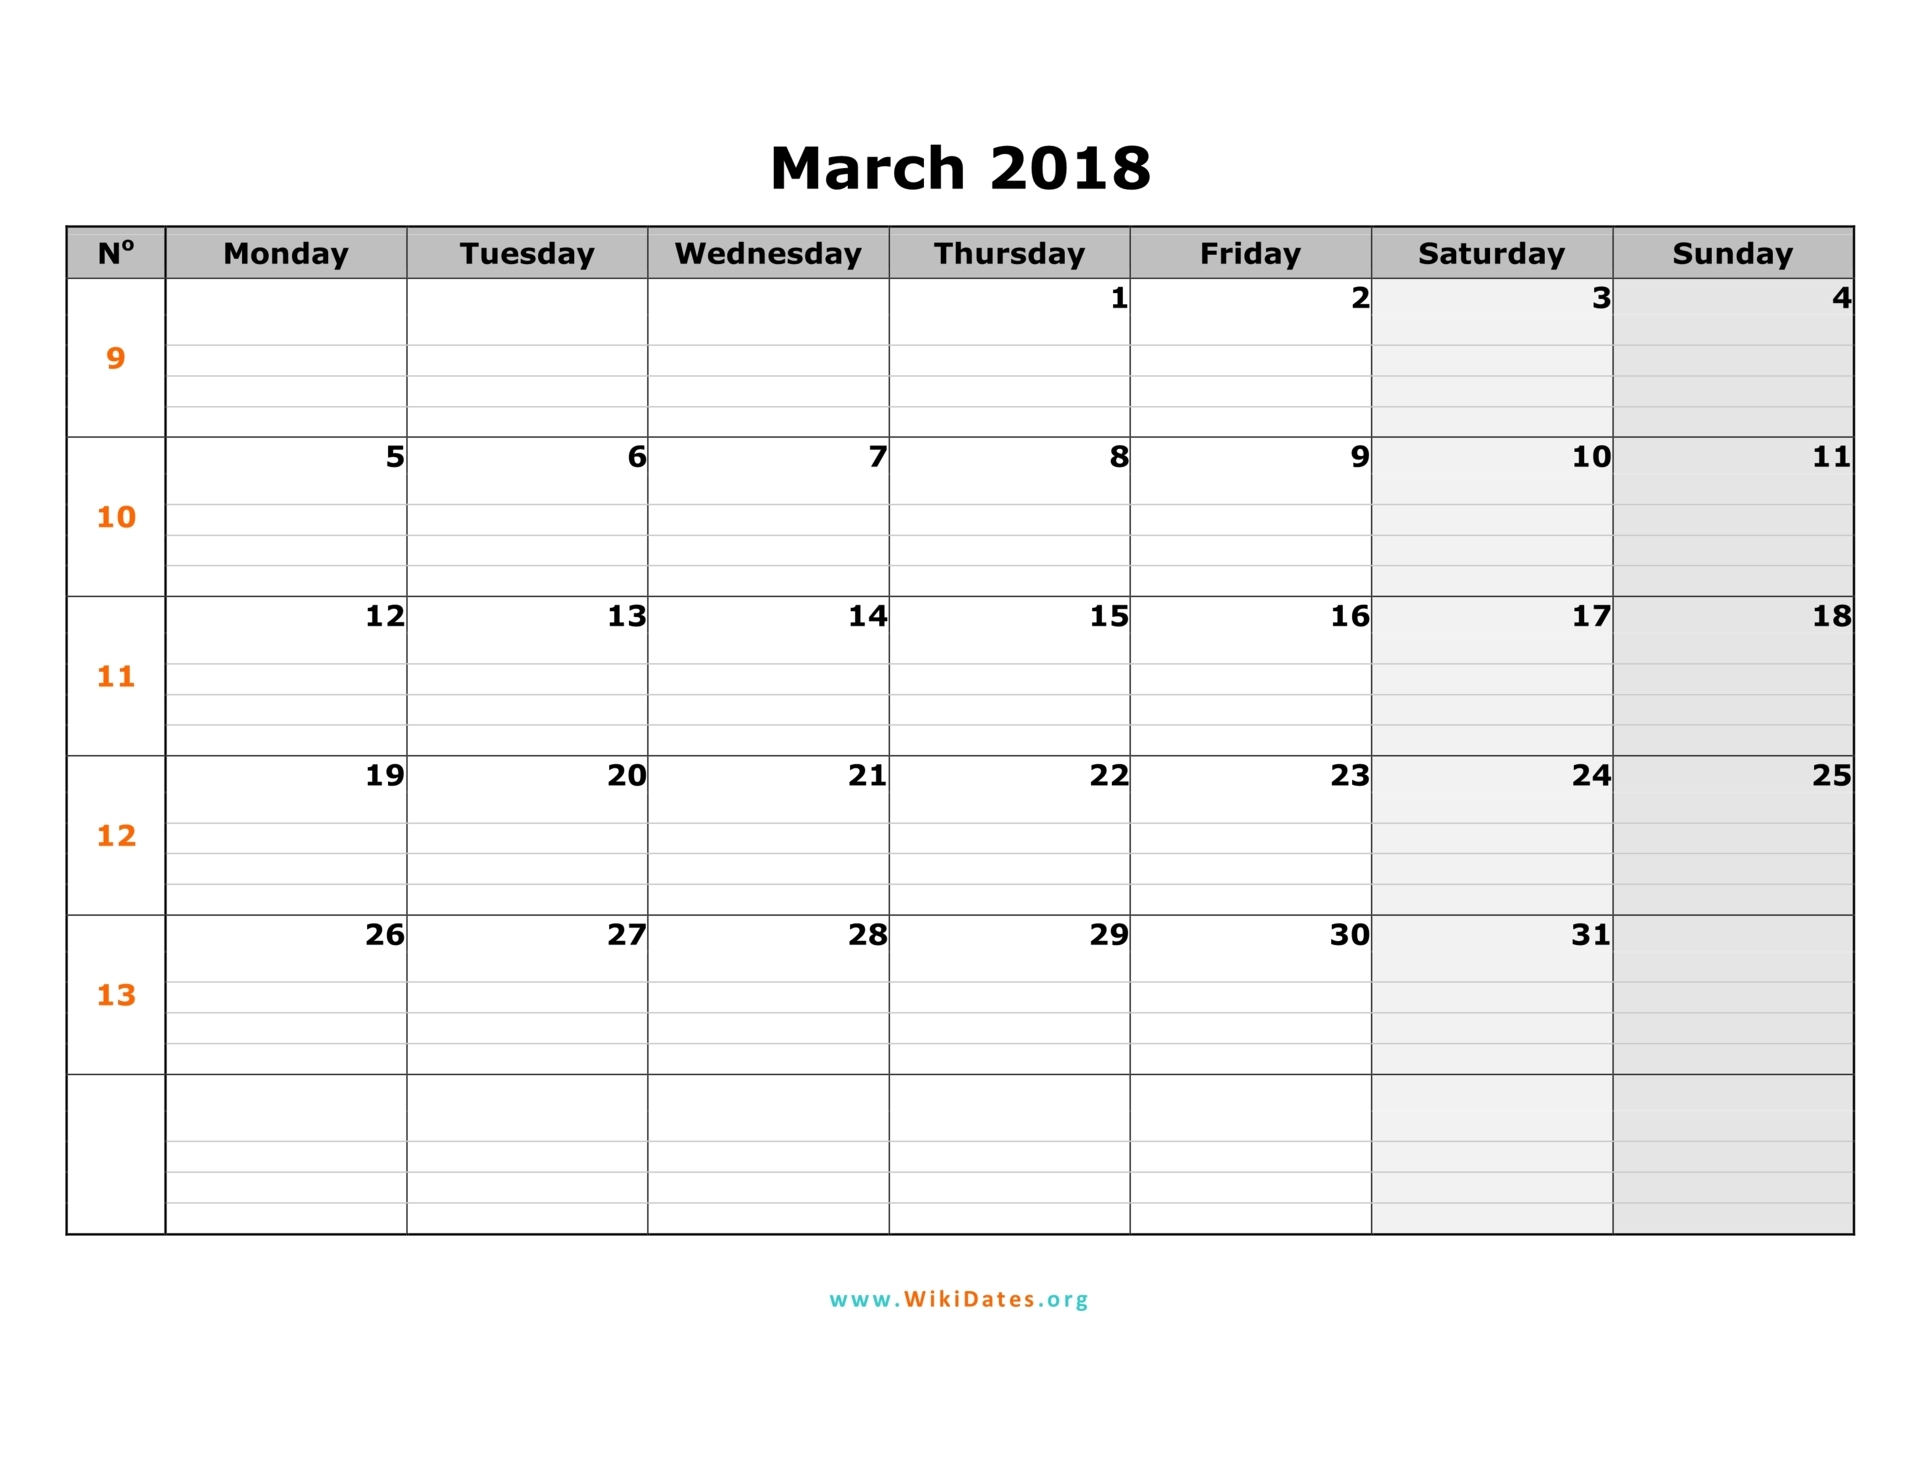 free-printable-calendar-2022-free-printable-calendar-march